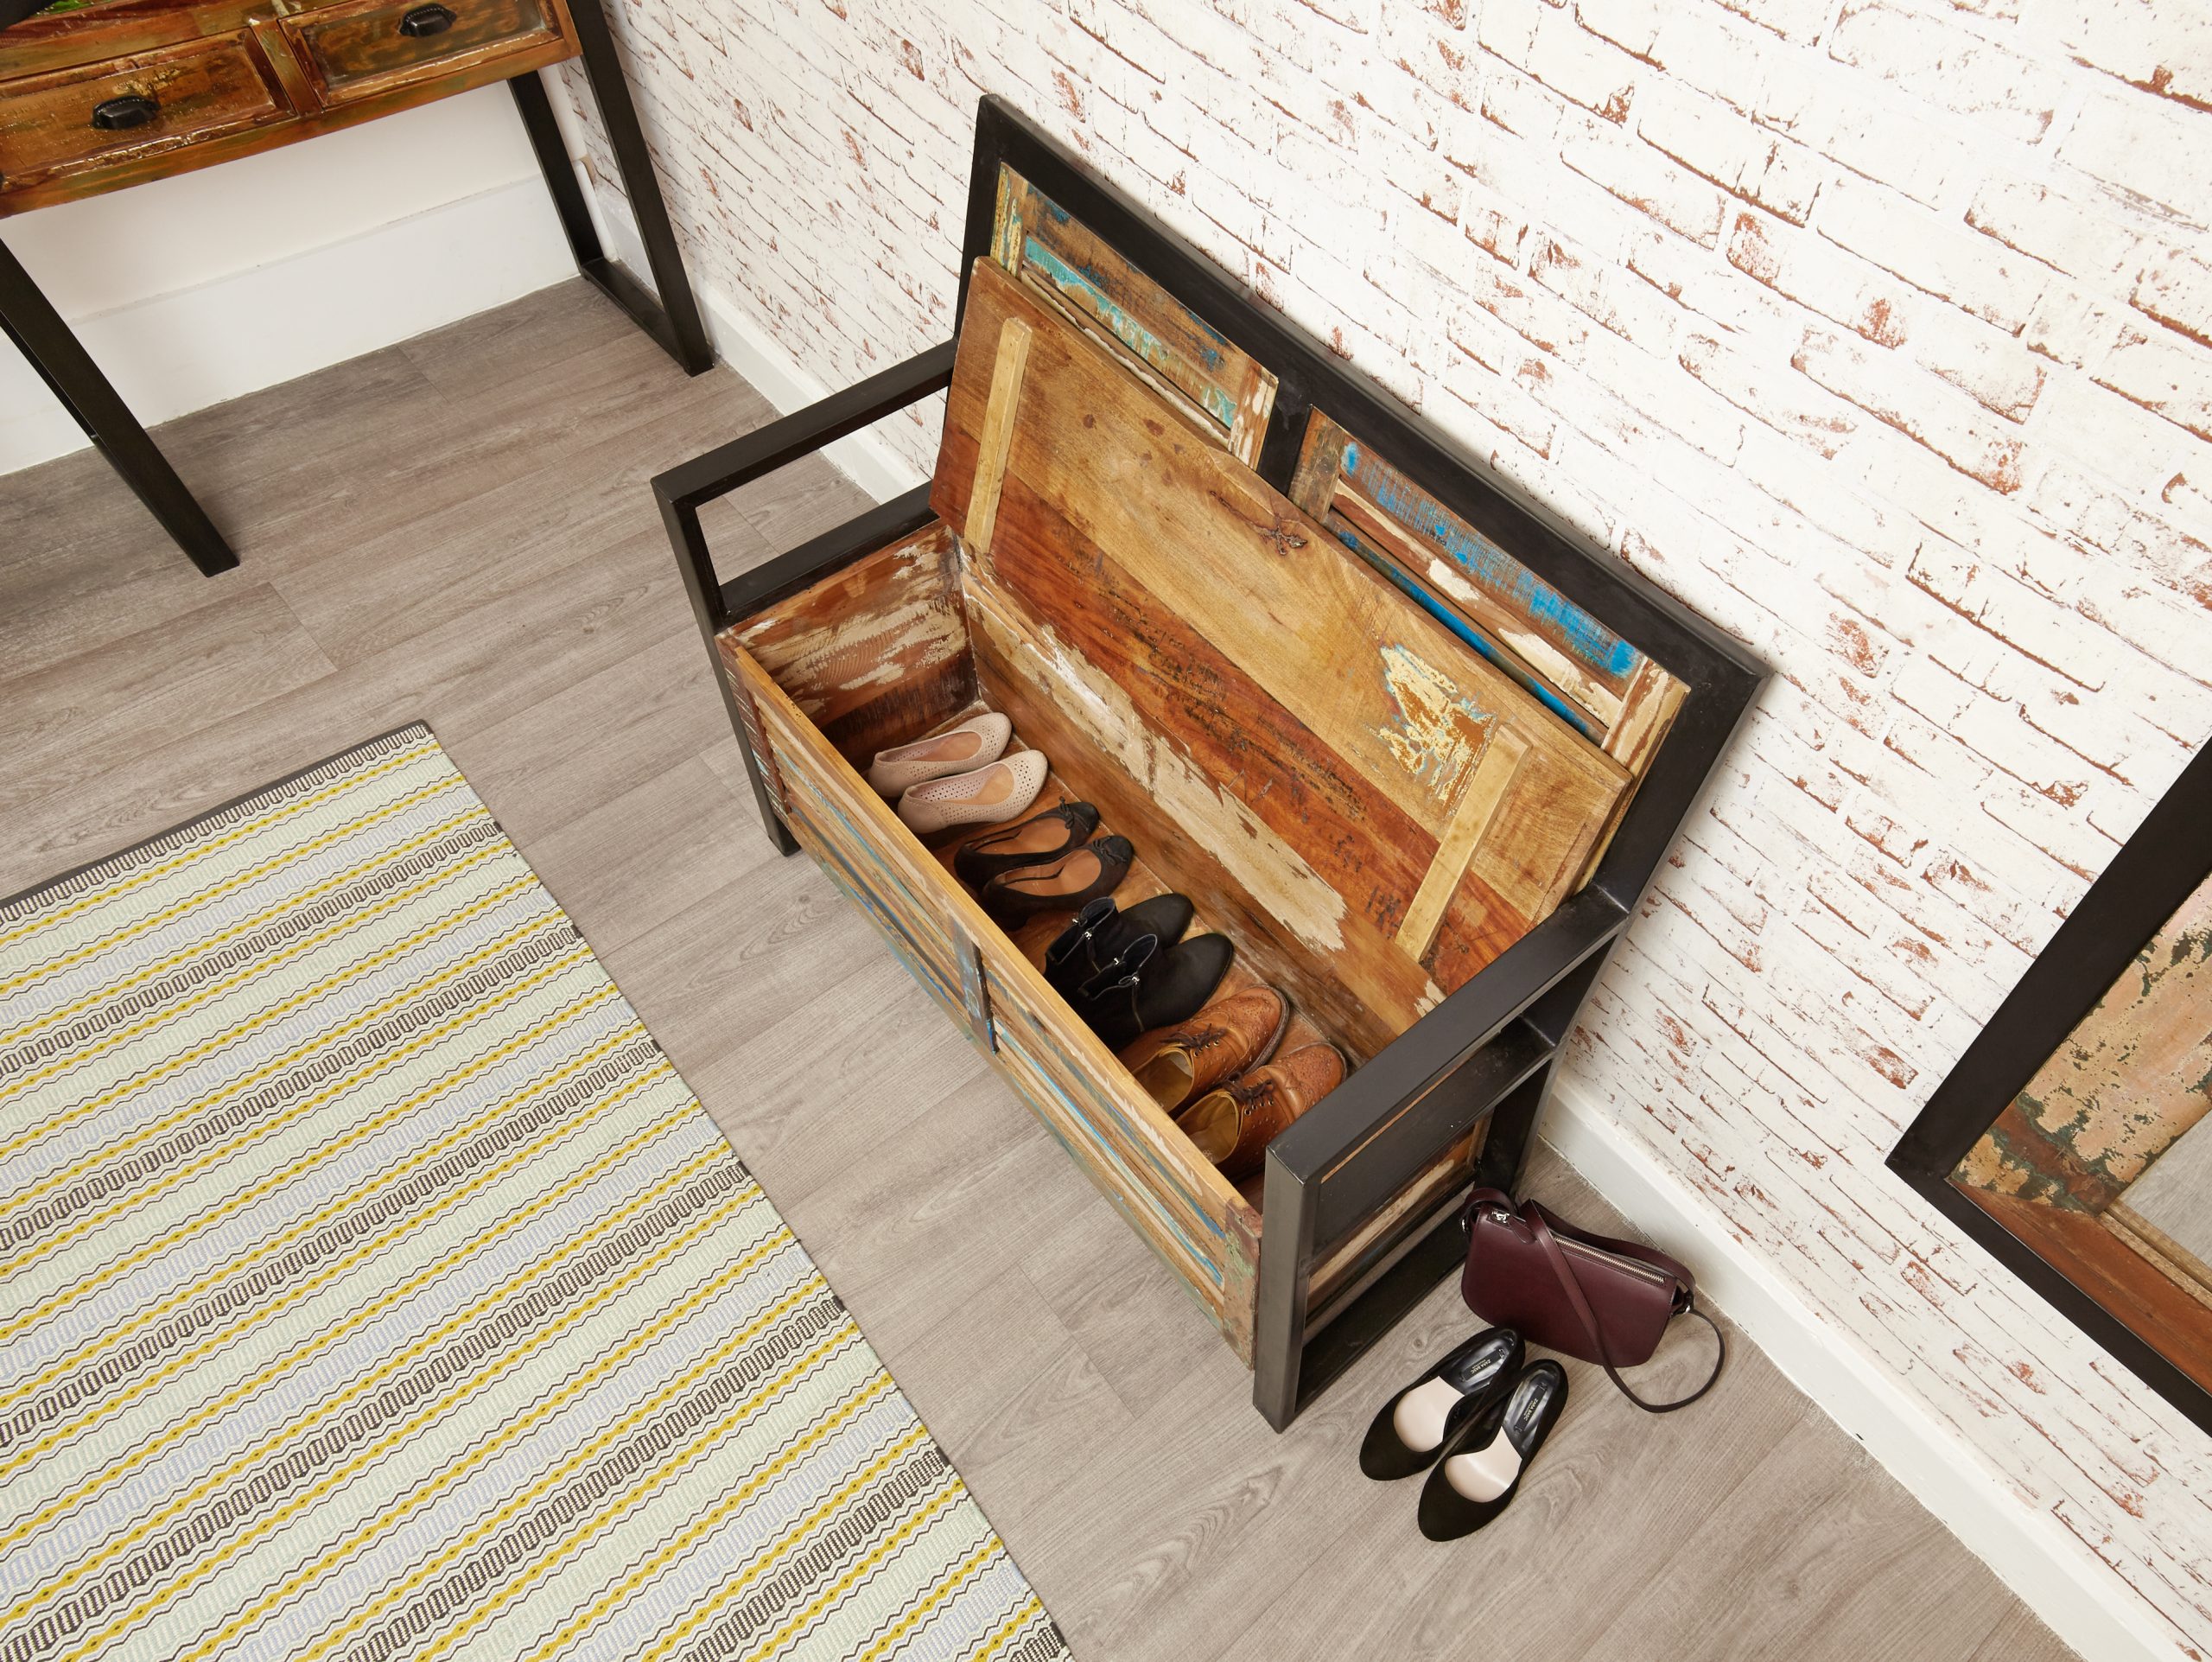 Monks bench with storage space